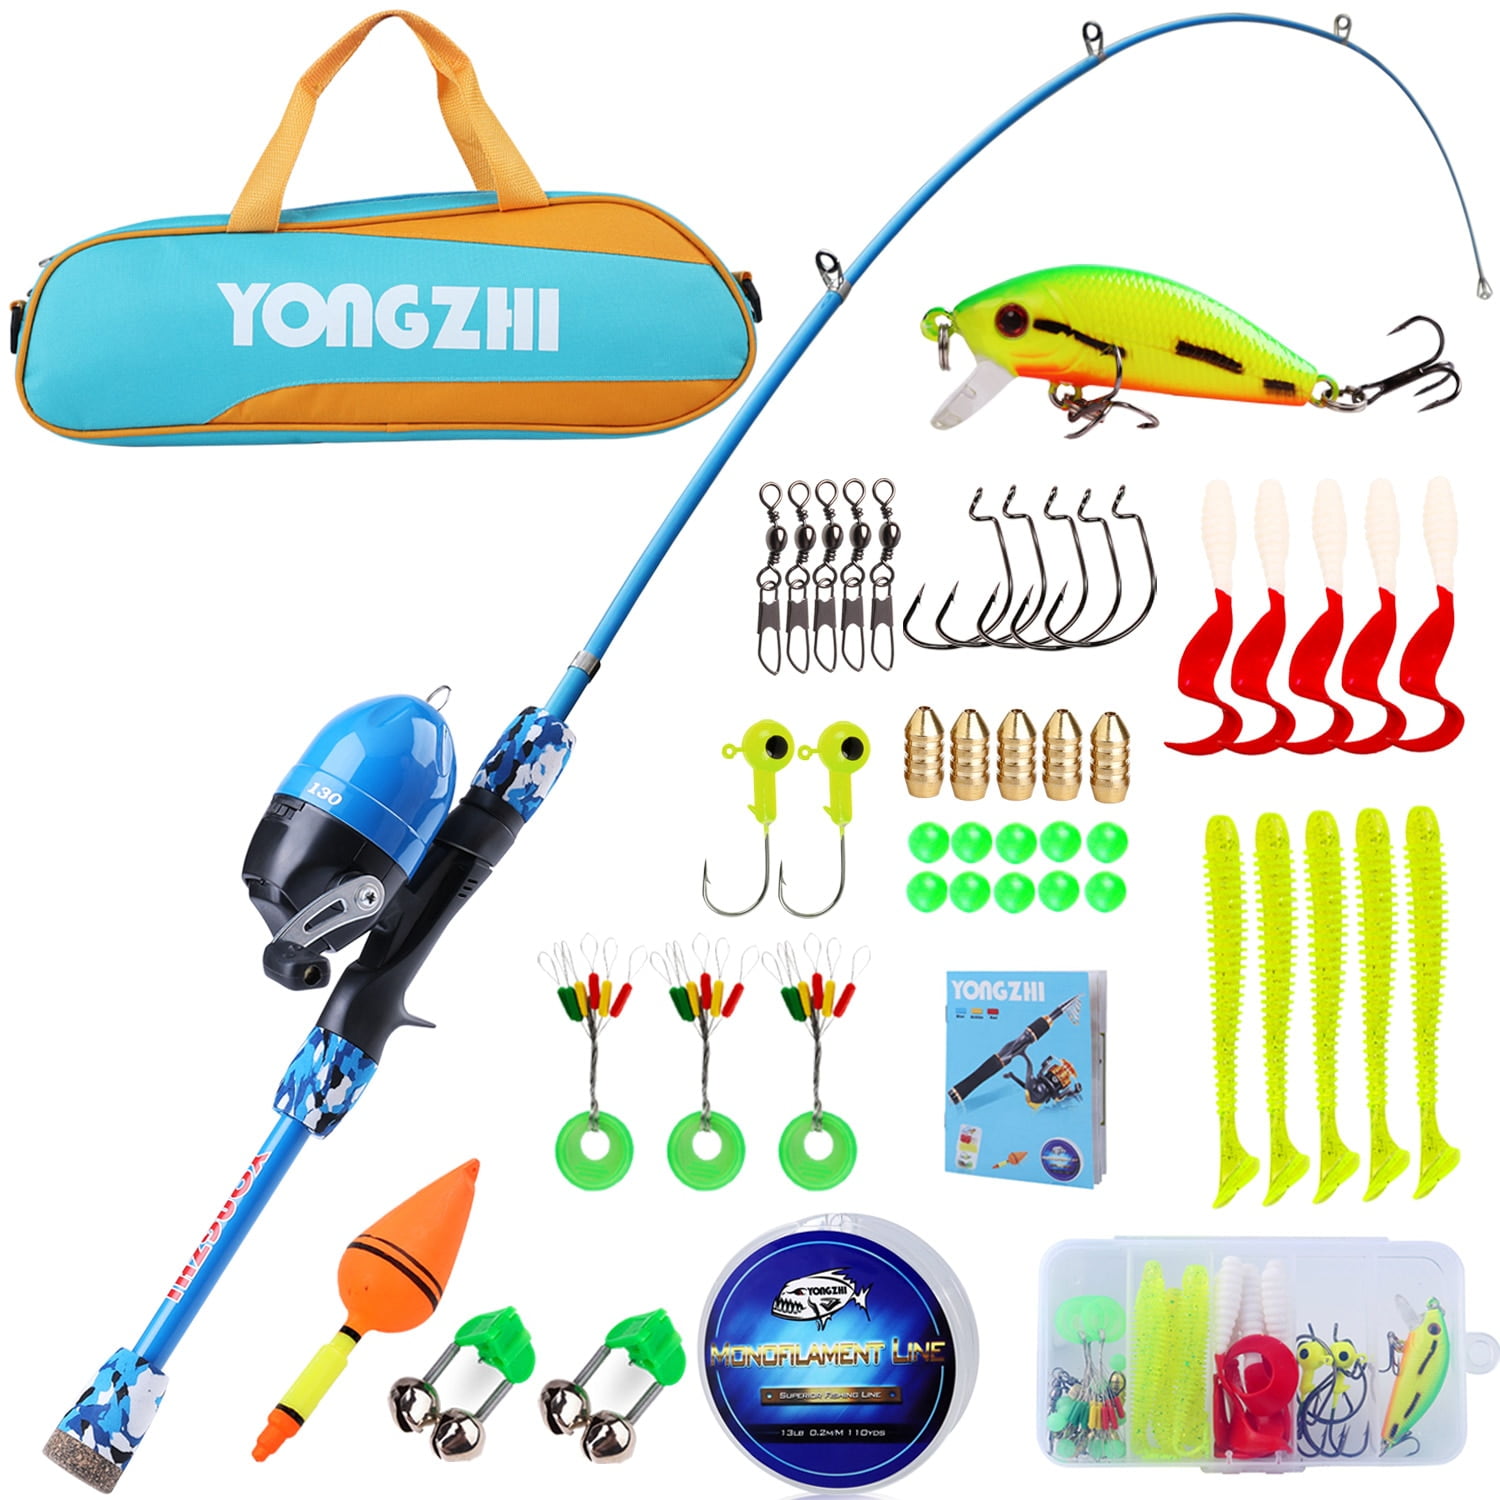 Round Tip-Up Pocket Fishing Pole 41cm Kids Outdoor Ice Fishing Rod and Reel 